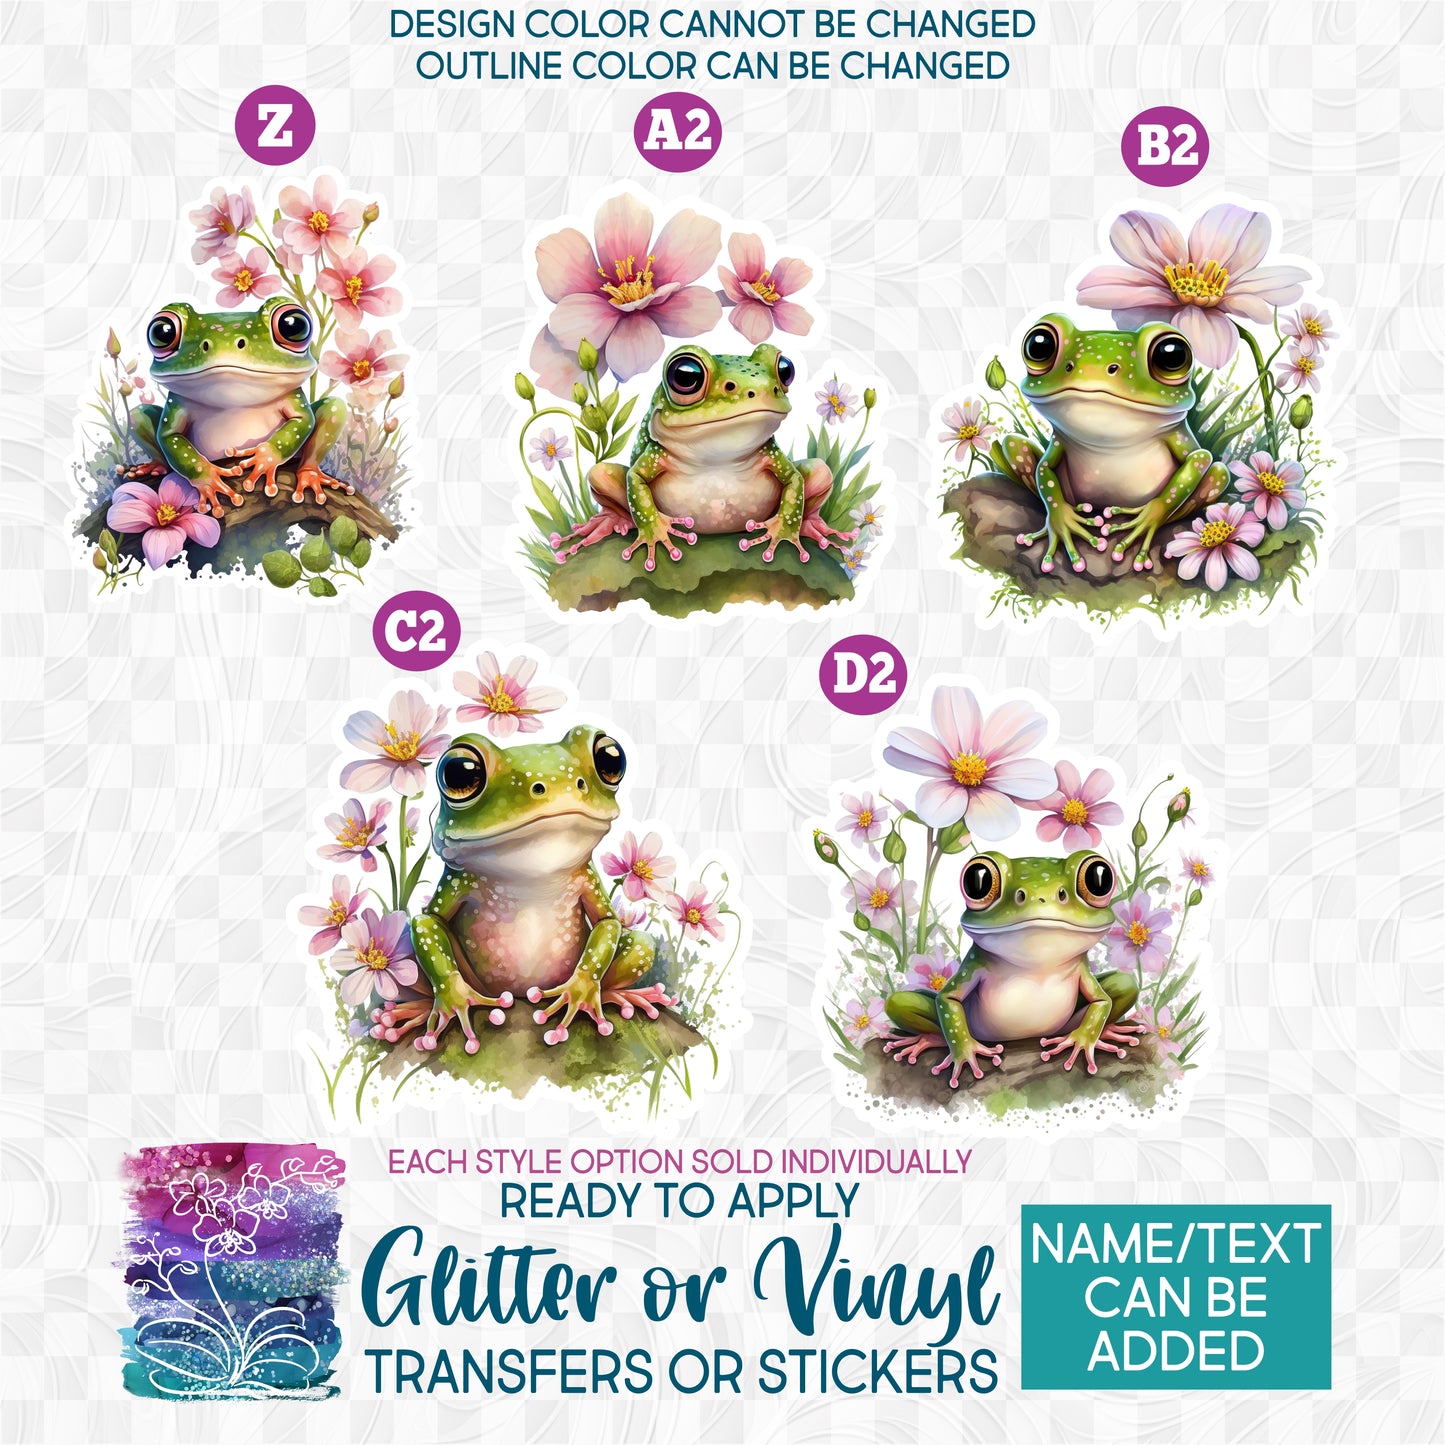 (s094) Watercolor Frog Frogs Pink Flowers Glitter or Vinyl Iron-On Transfer or Sticker